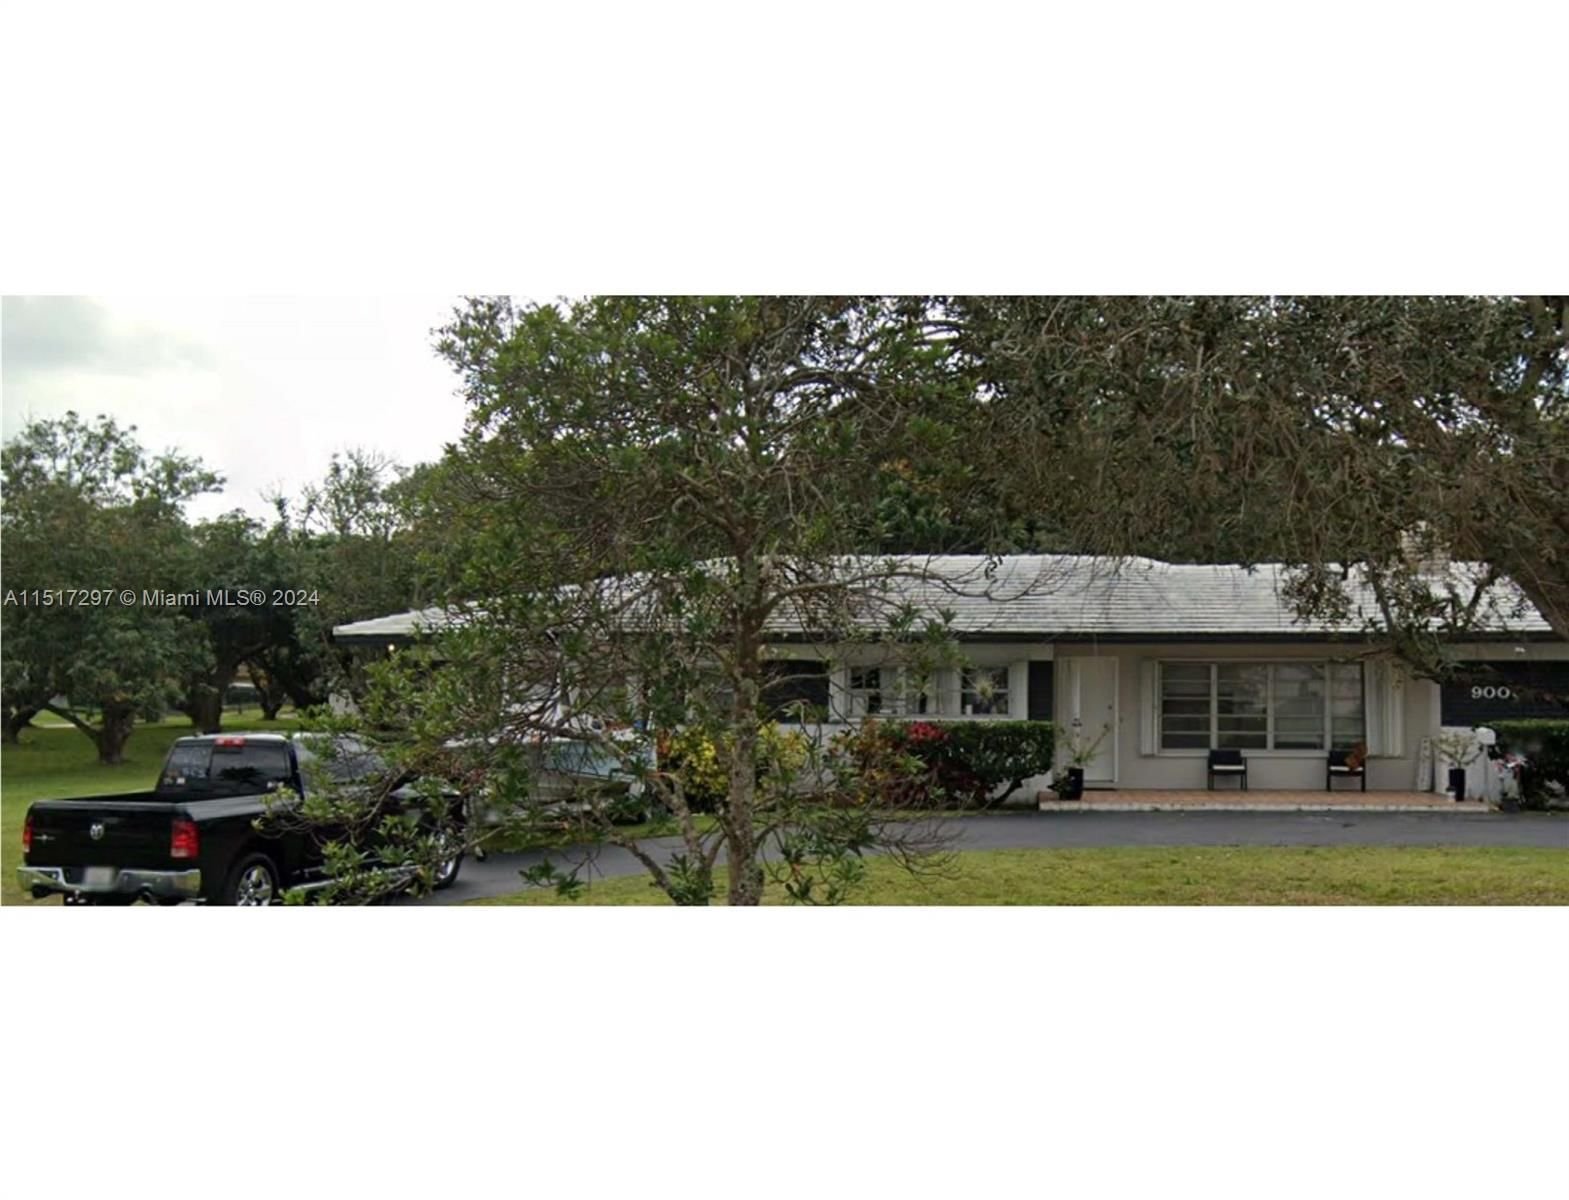 Real estate property located at 9000 174th St, Miami-Dade County, UNPLATTED, Palmetto Bay, FL